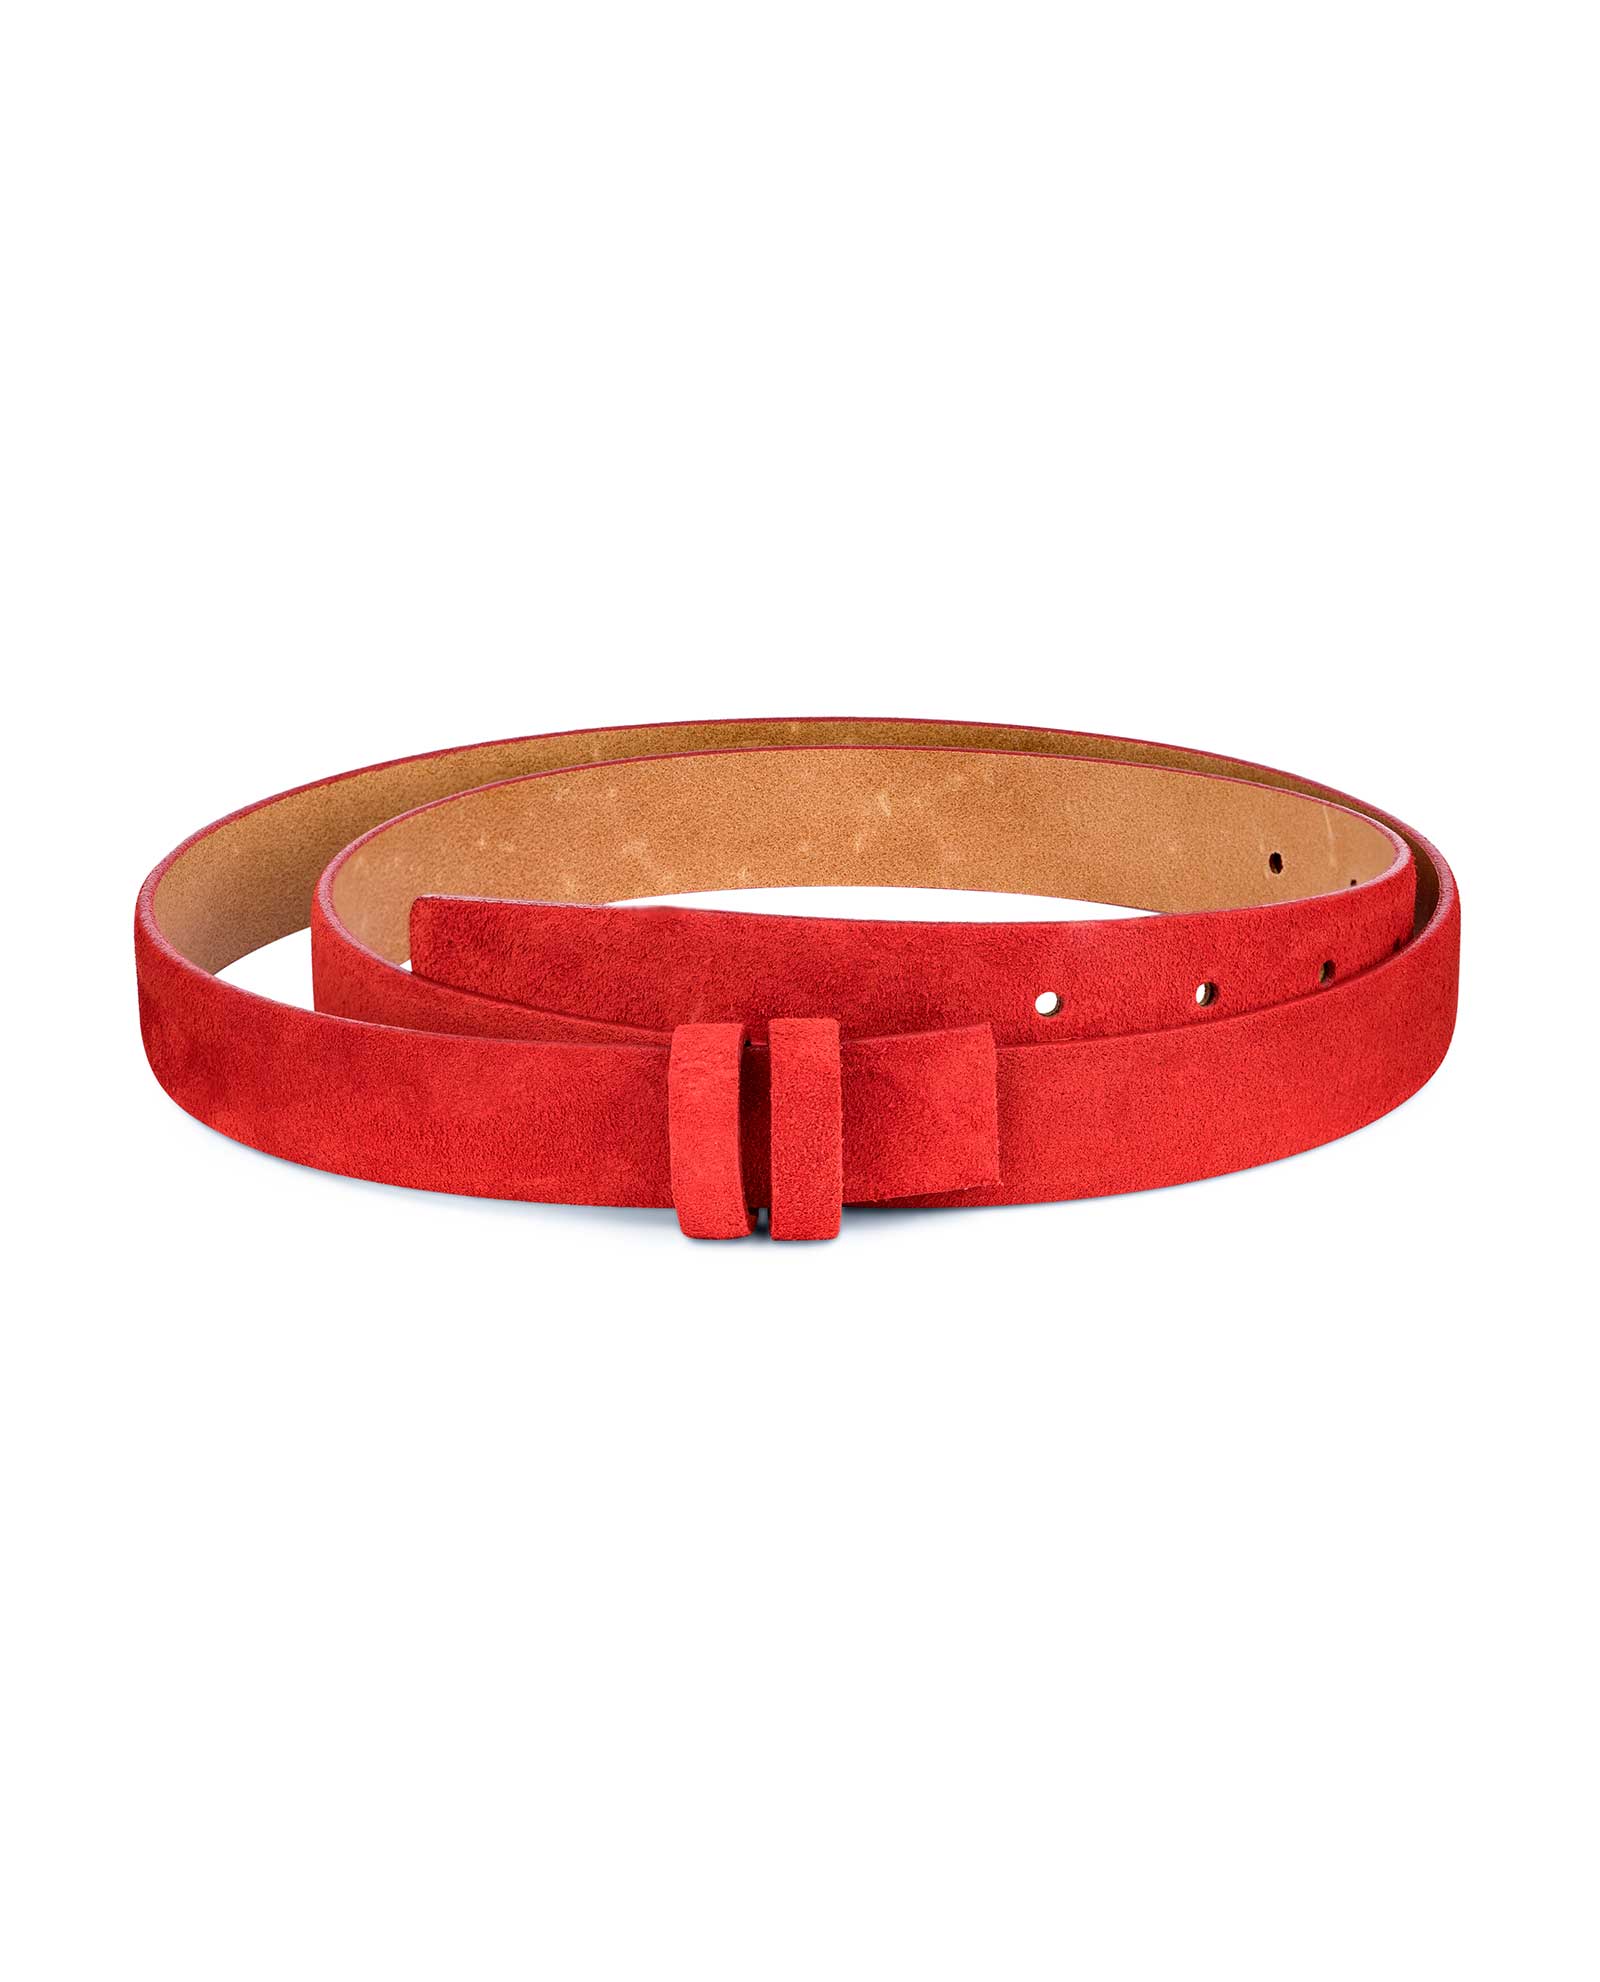 Red Belt Strap for Buckles Replacement - Real Leather 1 1/2 inch 34 / 85 cm - Red